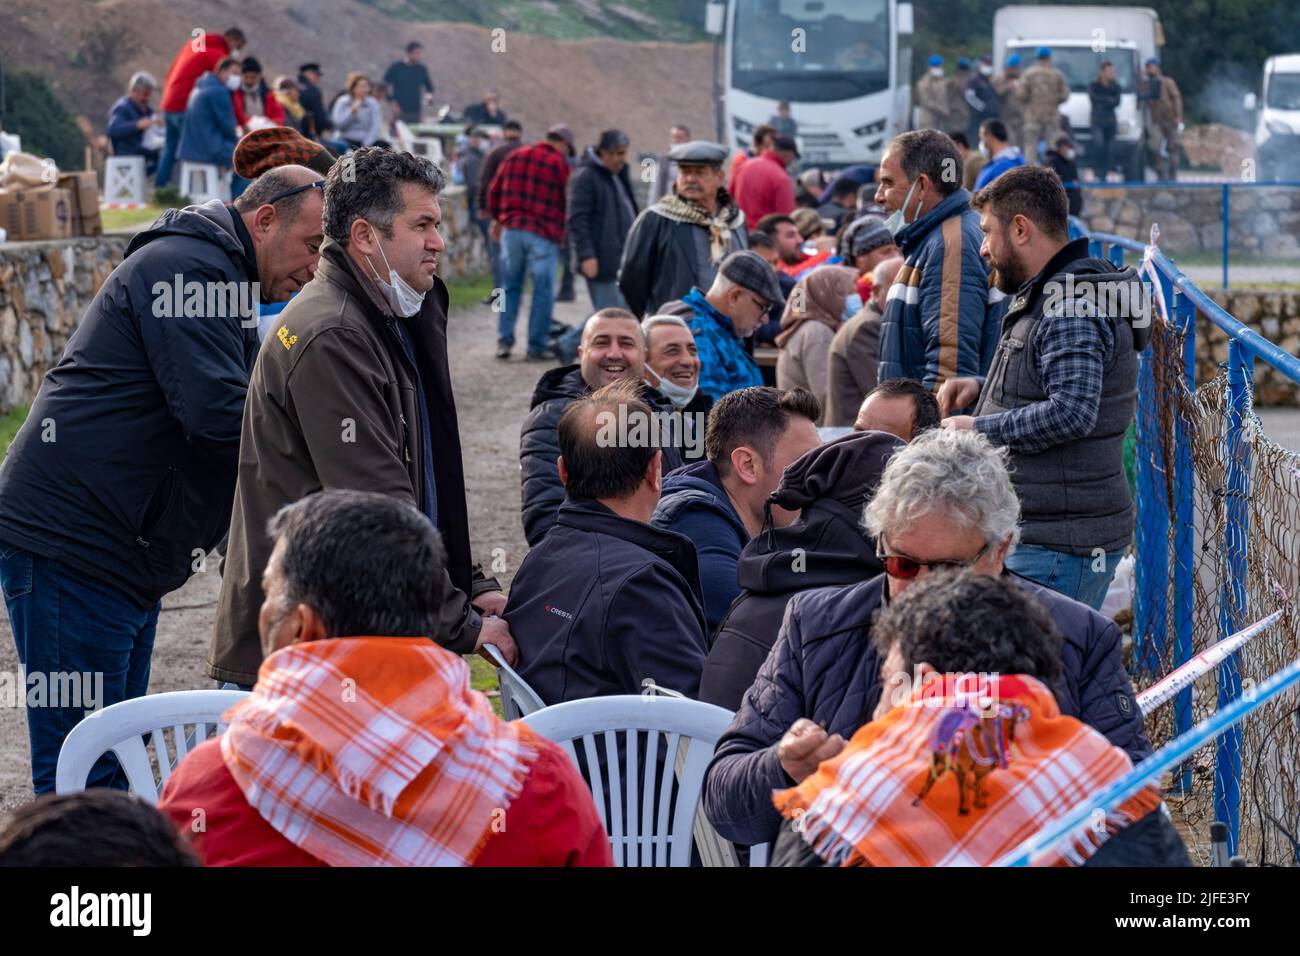 Bodrum, Turkey - 8th Jan. 2022: Local people chatting, laughing at the traditional outdoor camel wrestling fight. Some men using face mask Stock Photo